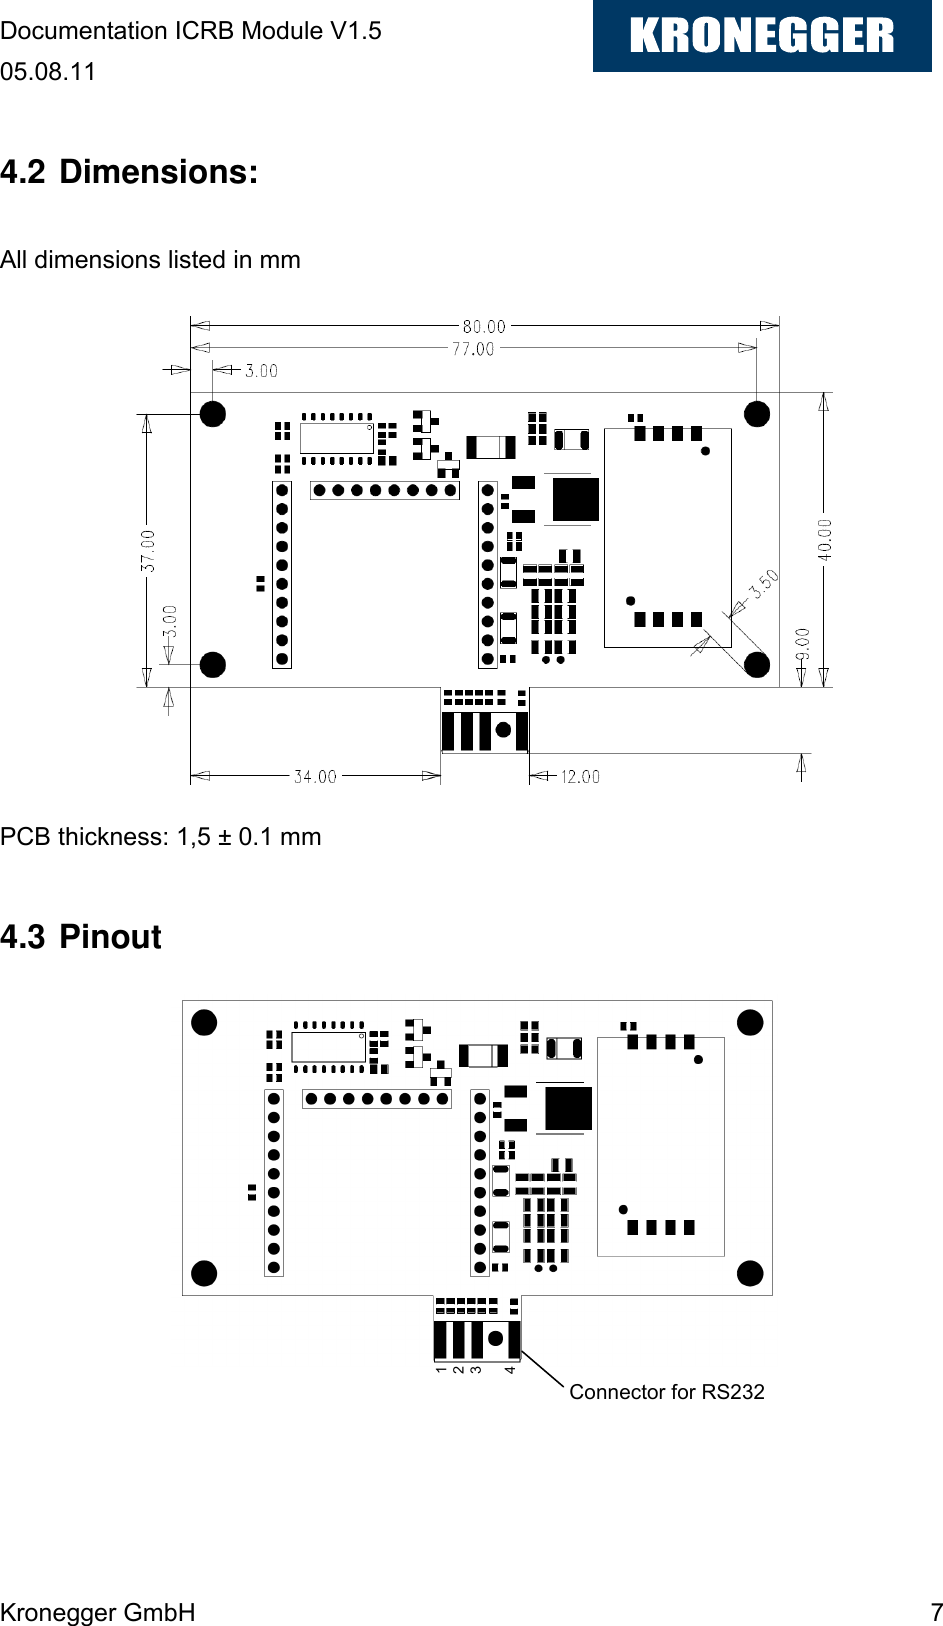 Documentation ICRB Module V1.5 05.08.11 Kronegger GmbH    7  4.2 Dimensions:  All dimensions listed in mm              PCB thickness: 1,5 ± 0.1 mm  4.3 Pinout             Connector for RS232 1 2 3  4 